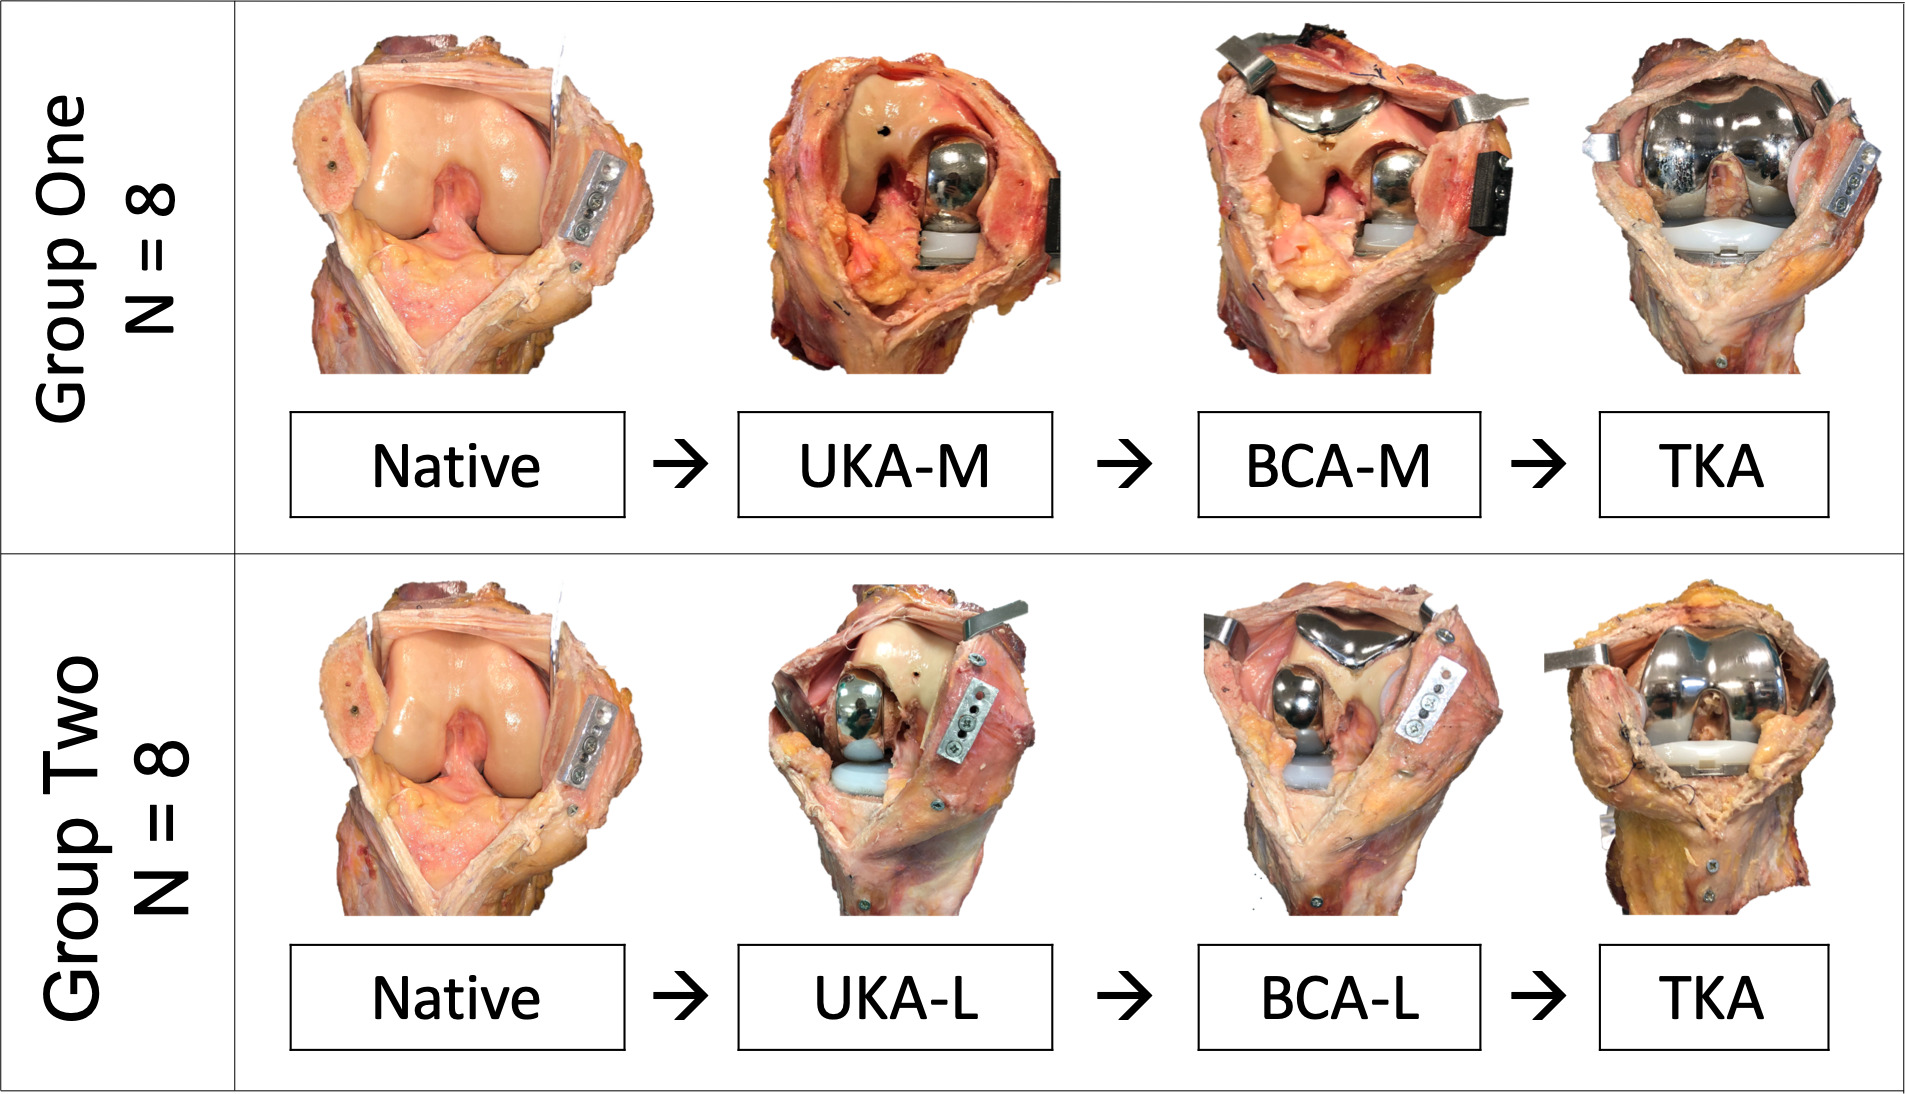 Fig. 2 
            Arthroplasty sequences for Groups 1 and 2: medial unicompartmental knee arthroplasty (UKA-M), medial bicompartmental arthroplasty (BCA-M), lateral unicompartmental knee arthroplasty (UKA-L), lateral bicompartmental knee arthroplasty (BCA-L), and posterior-cruciate retaining total knee arthroplasty (TKA).
          